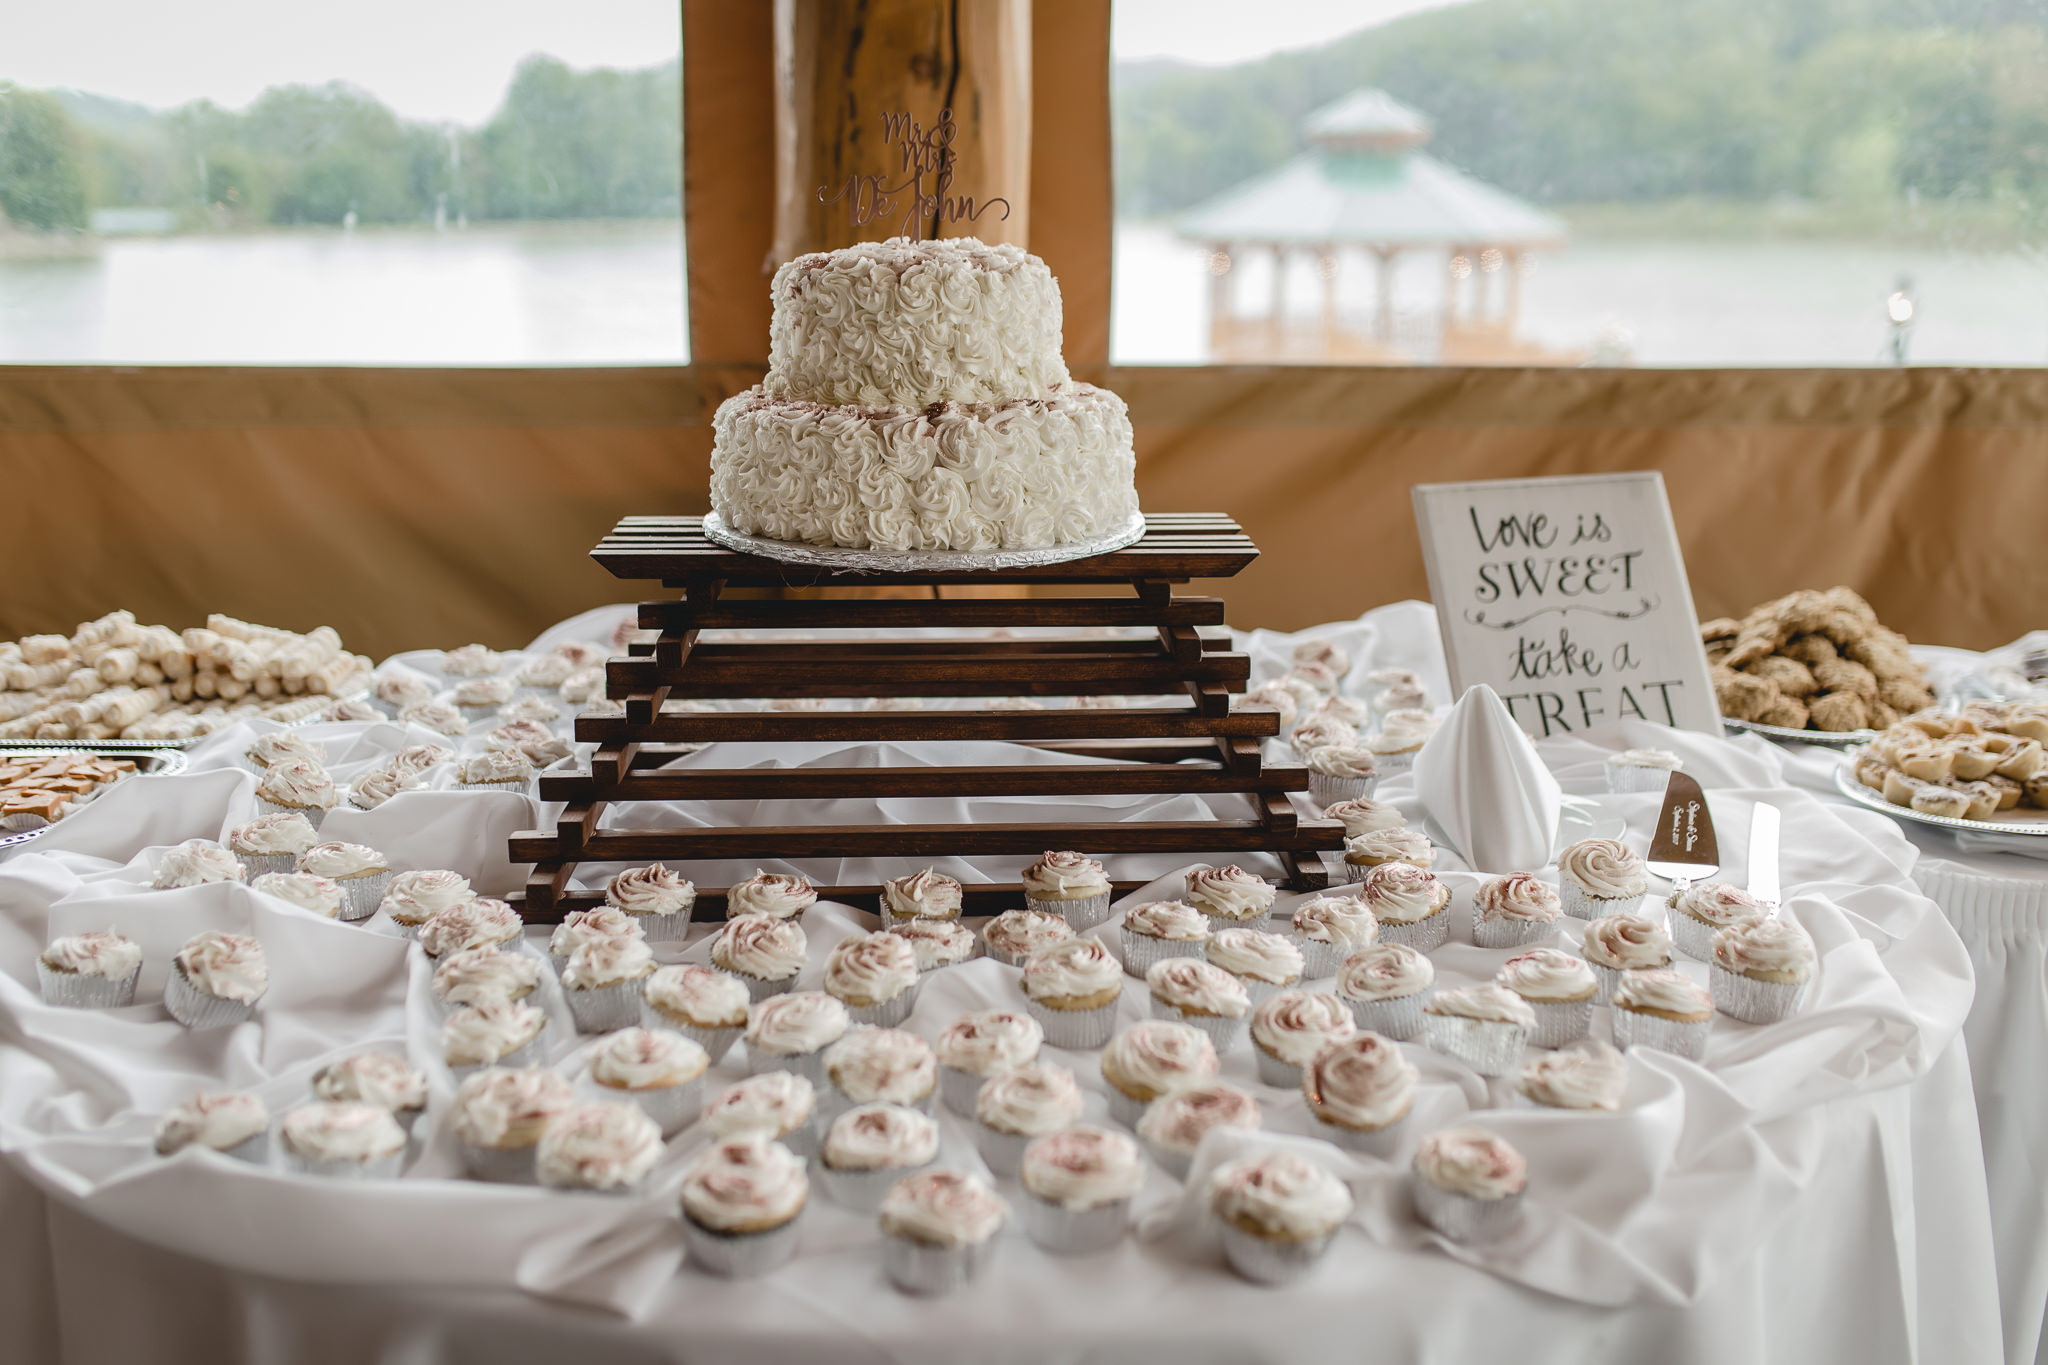 Wedding cake by Beth's Cake & Candy at the Gathering Place at Darlington Lake